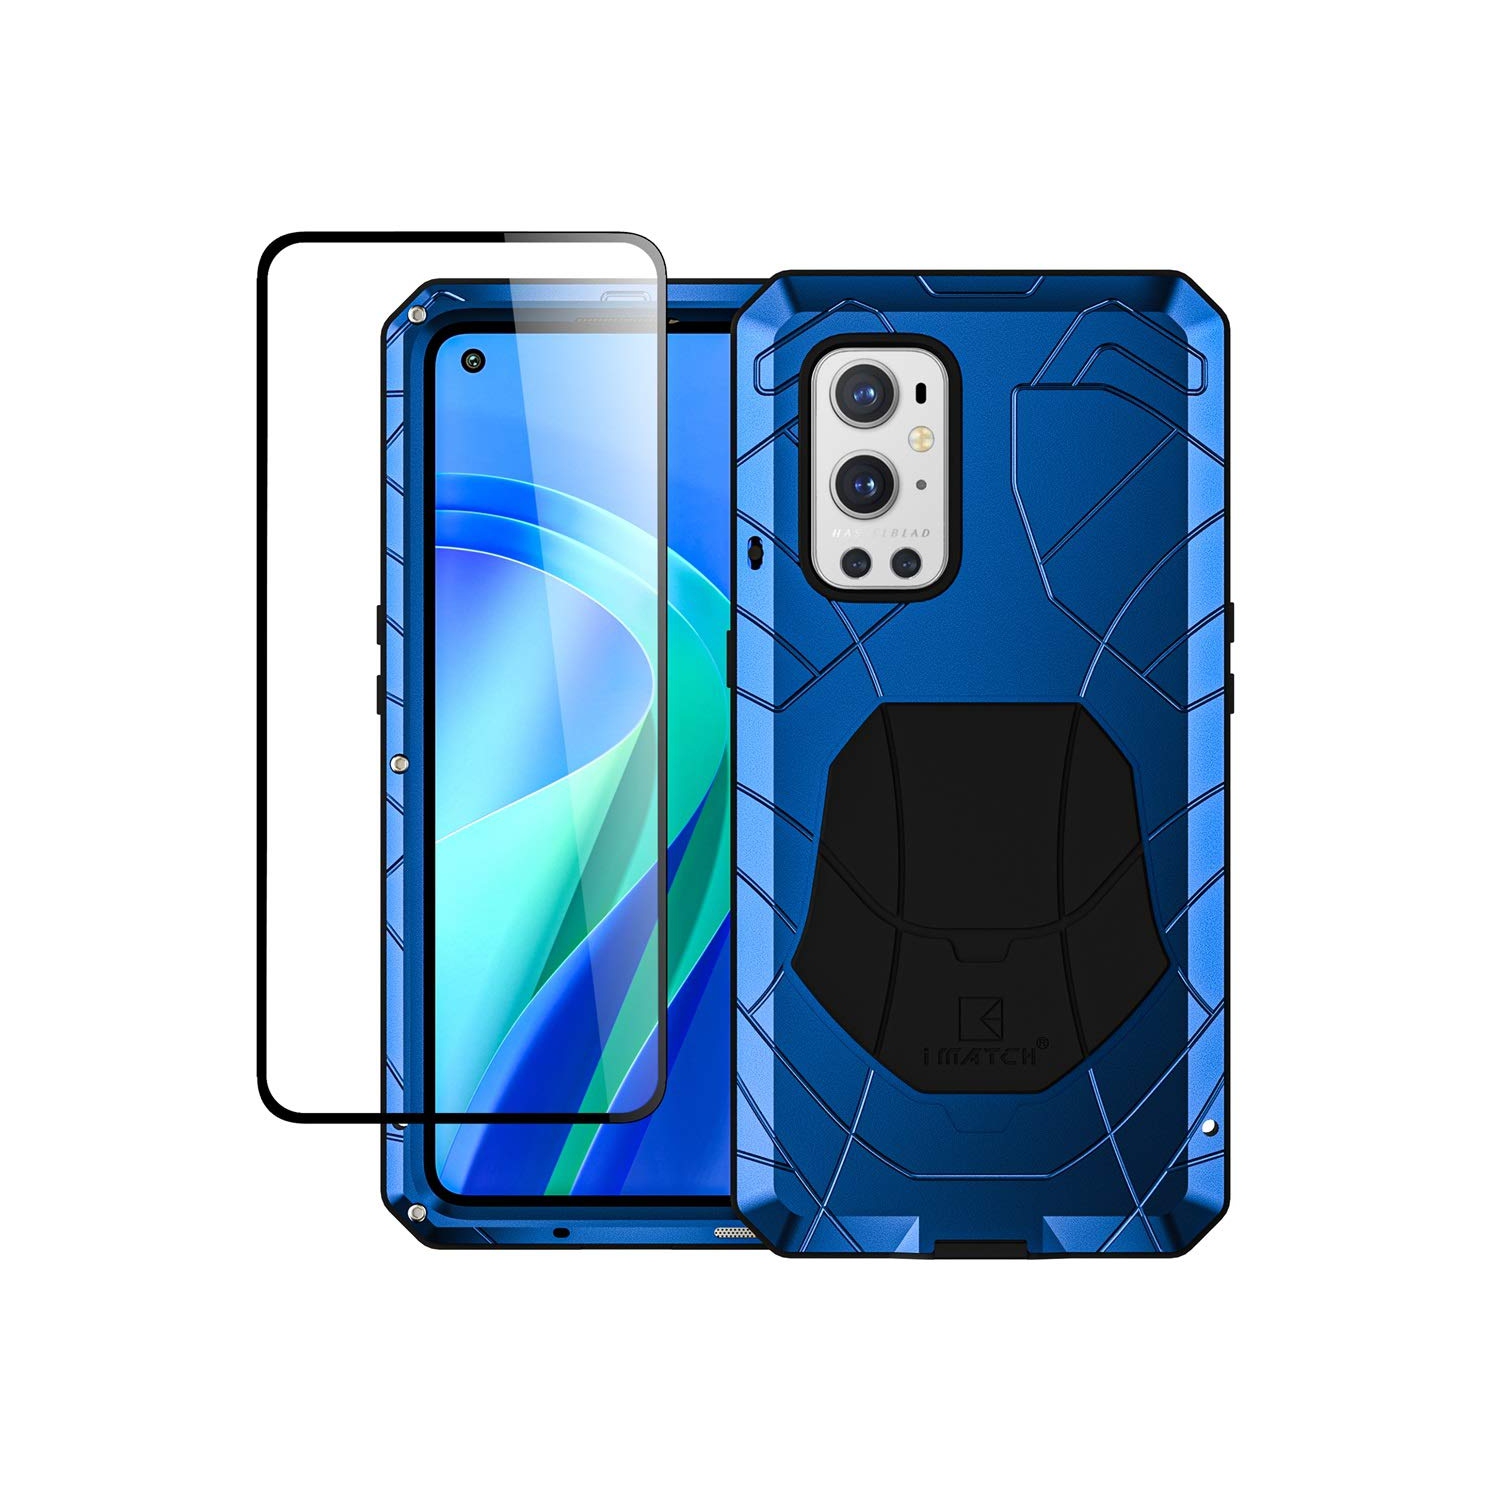 Feitenn Shockproof Metal Bumper for Oneplus 9 Pro 5G Rugged Case, Heavy Duty Dual Layer Cover Armor Military Defender Soft S